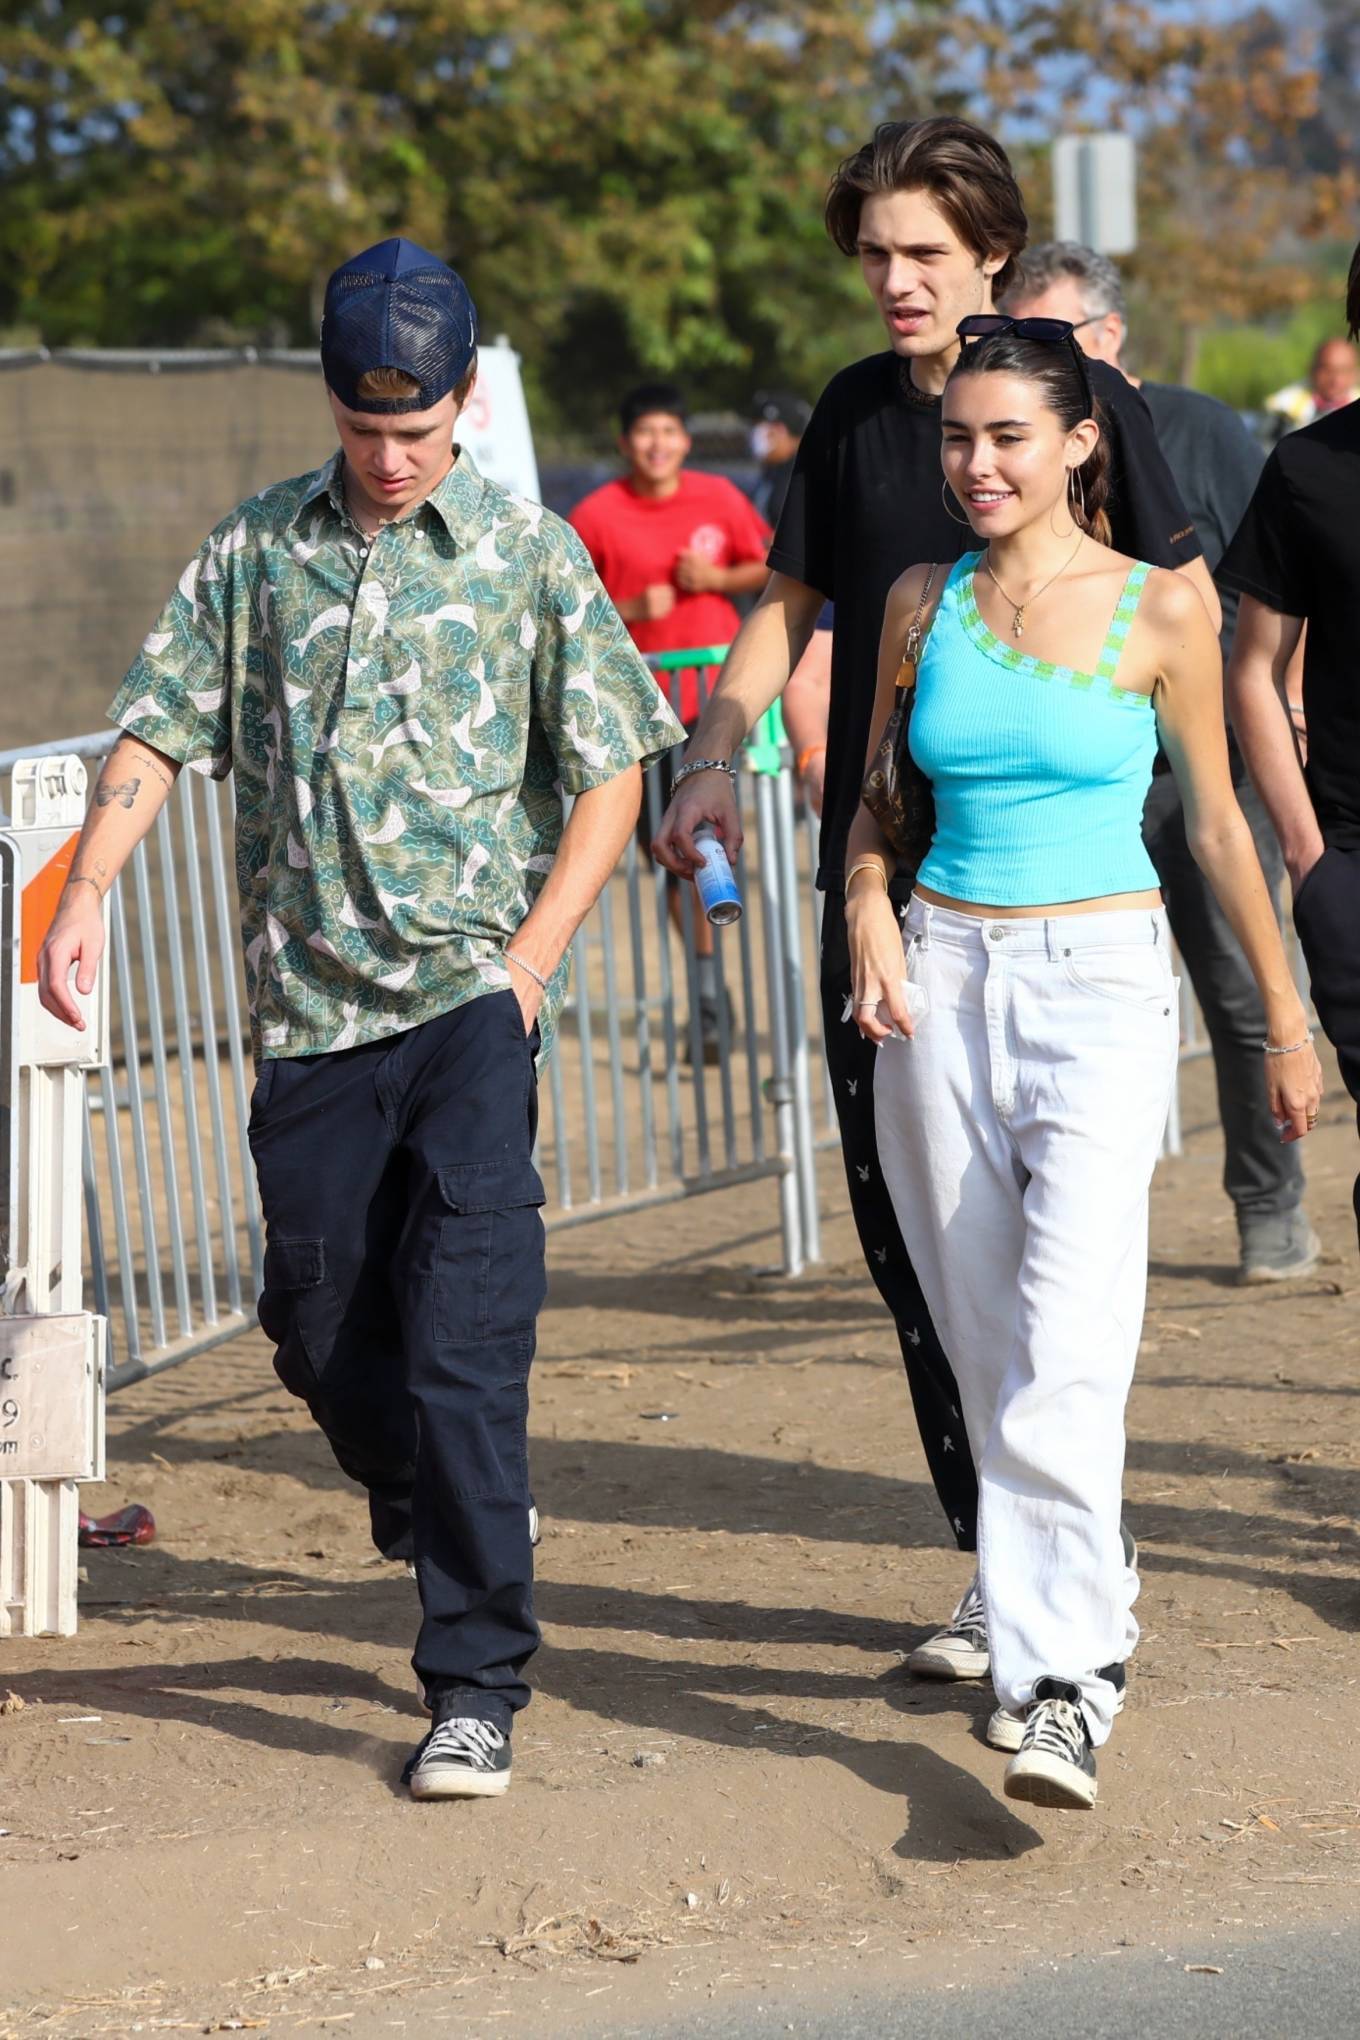 Madison Beer 2021 : Madison Beer – Seen while she goes to the annual Malibu Chili Cook-Off in Malibu-21